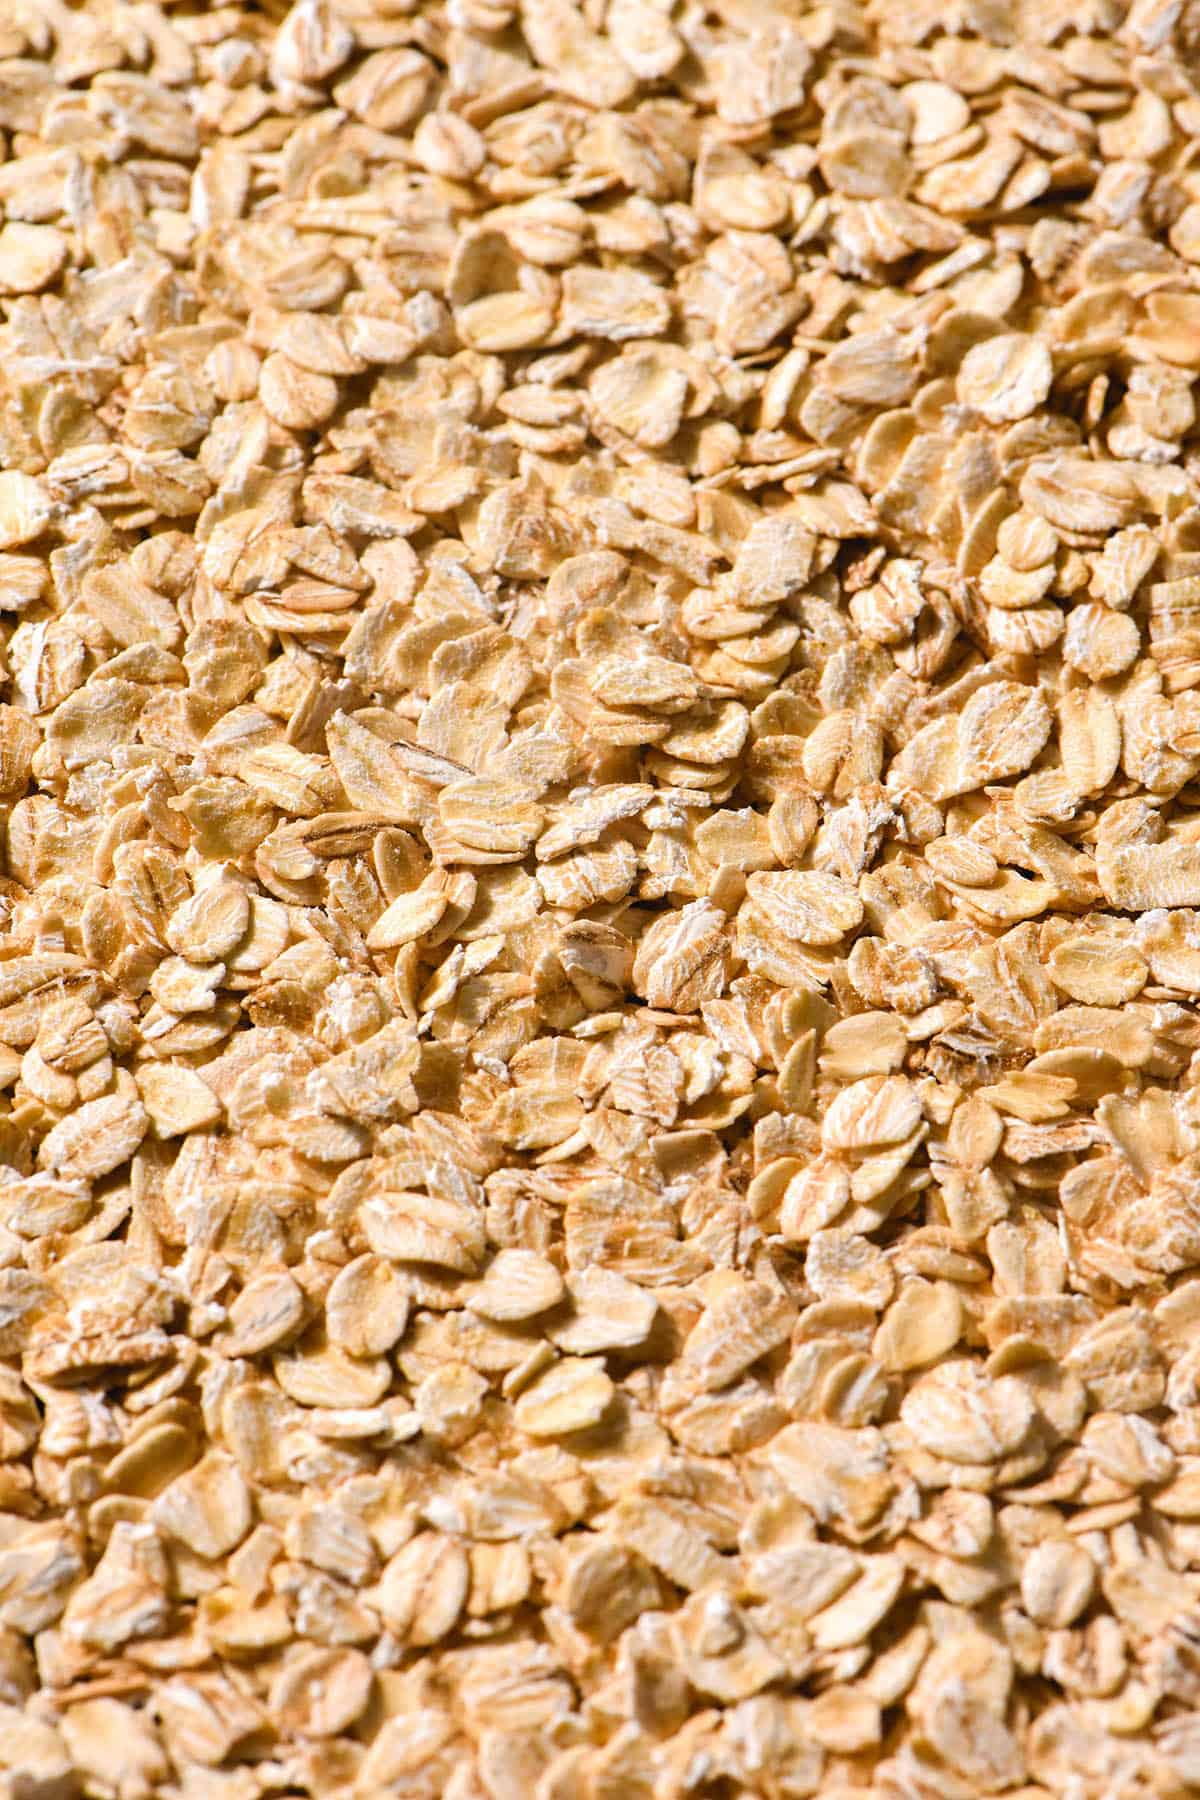 An aerial image of rolled oats